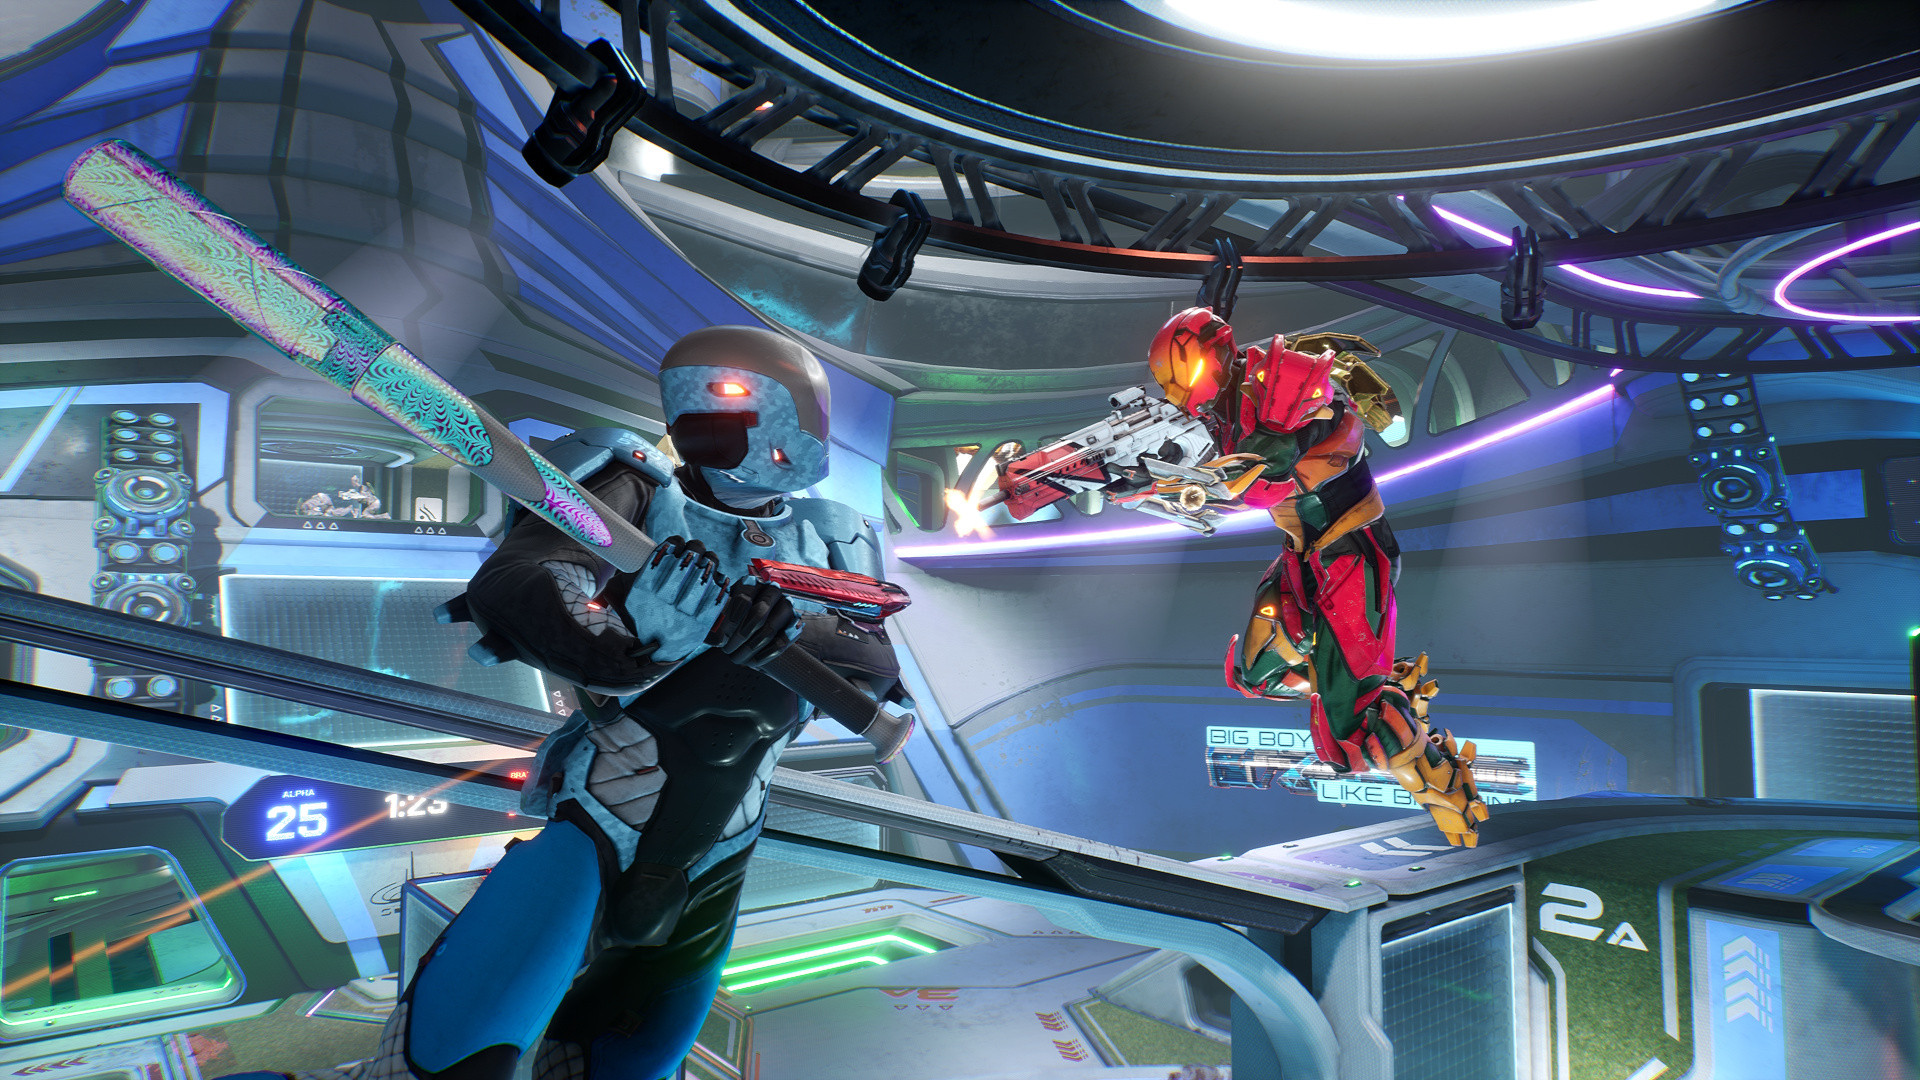 Splitgate server status: How to check if the servers are down